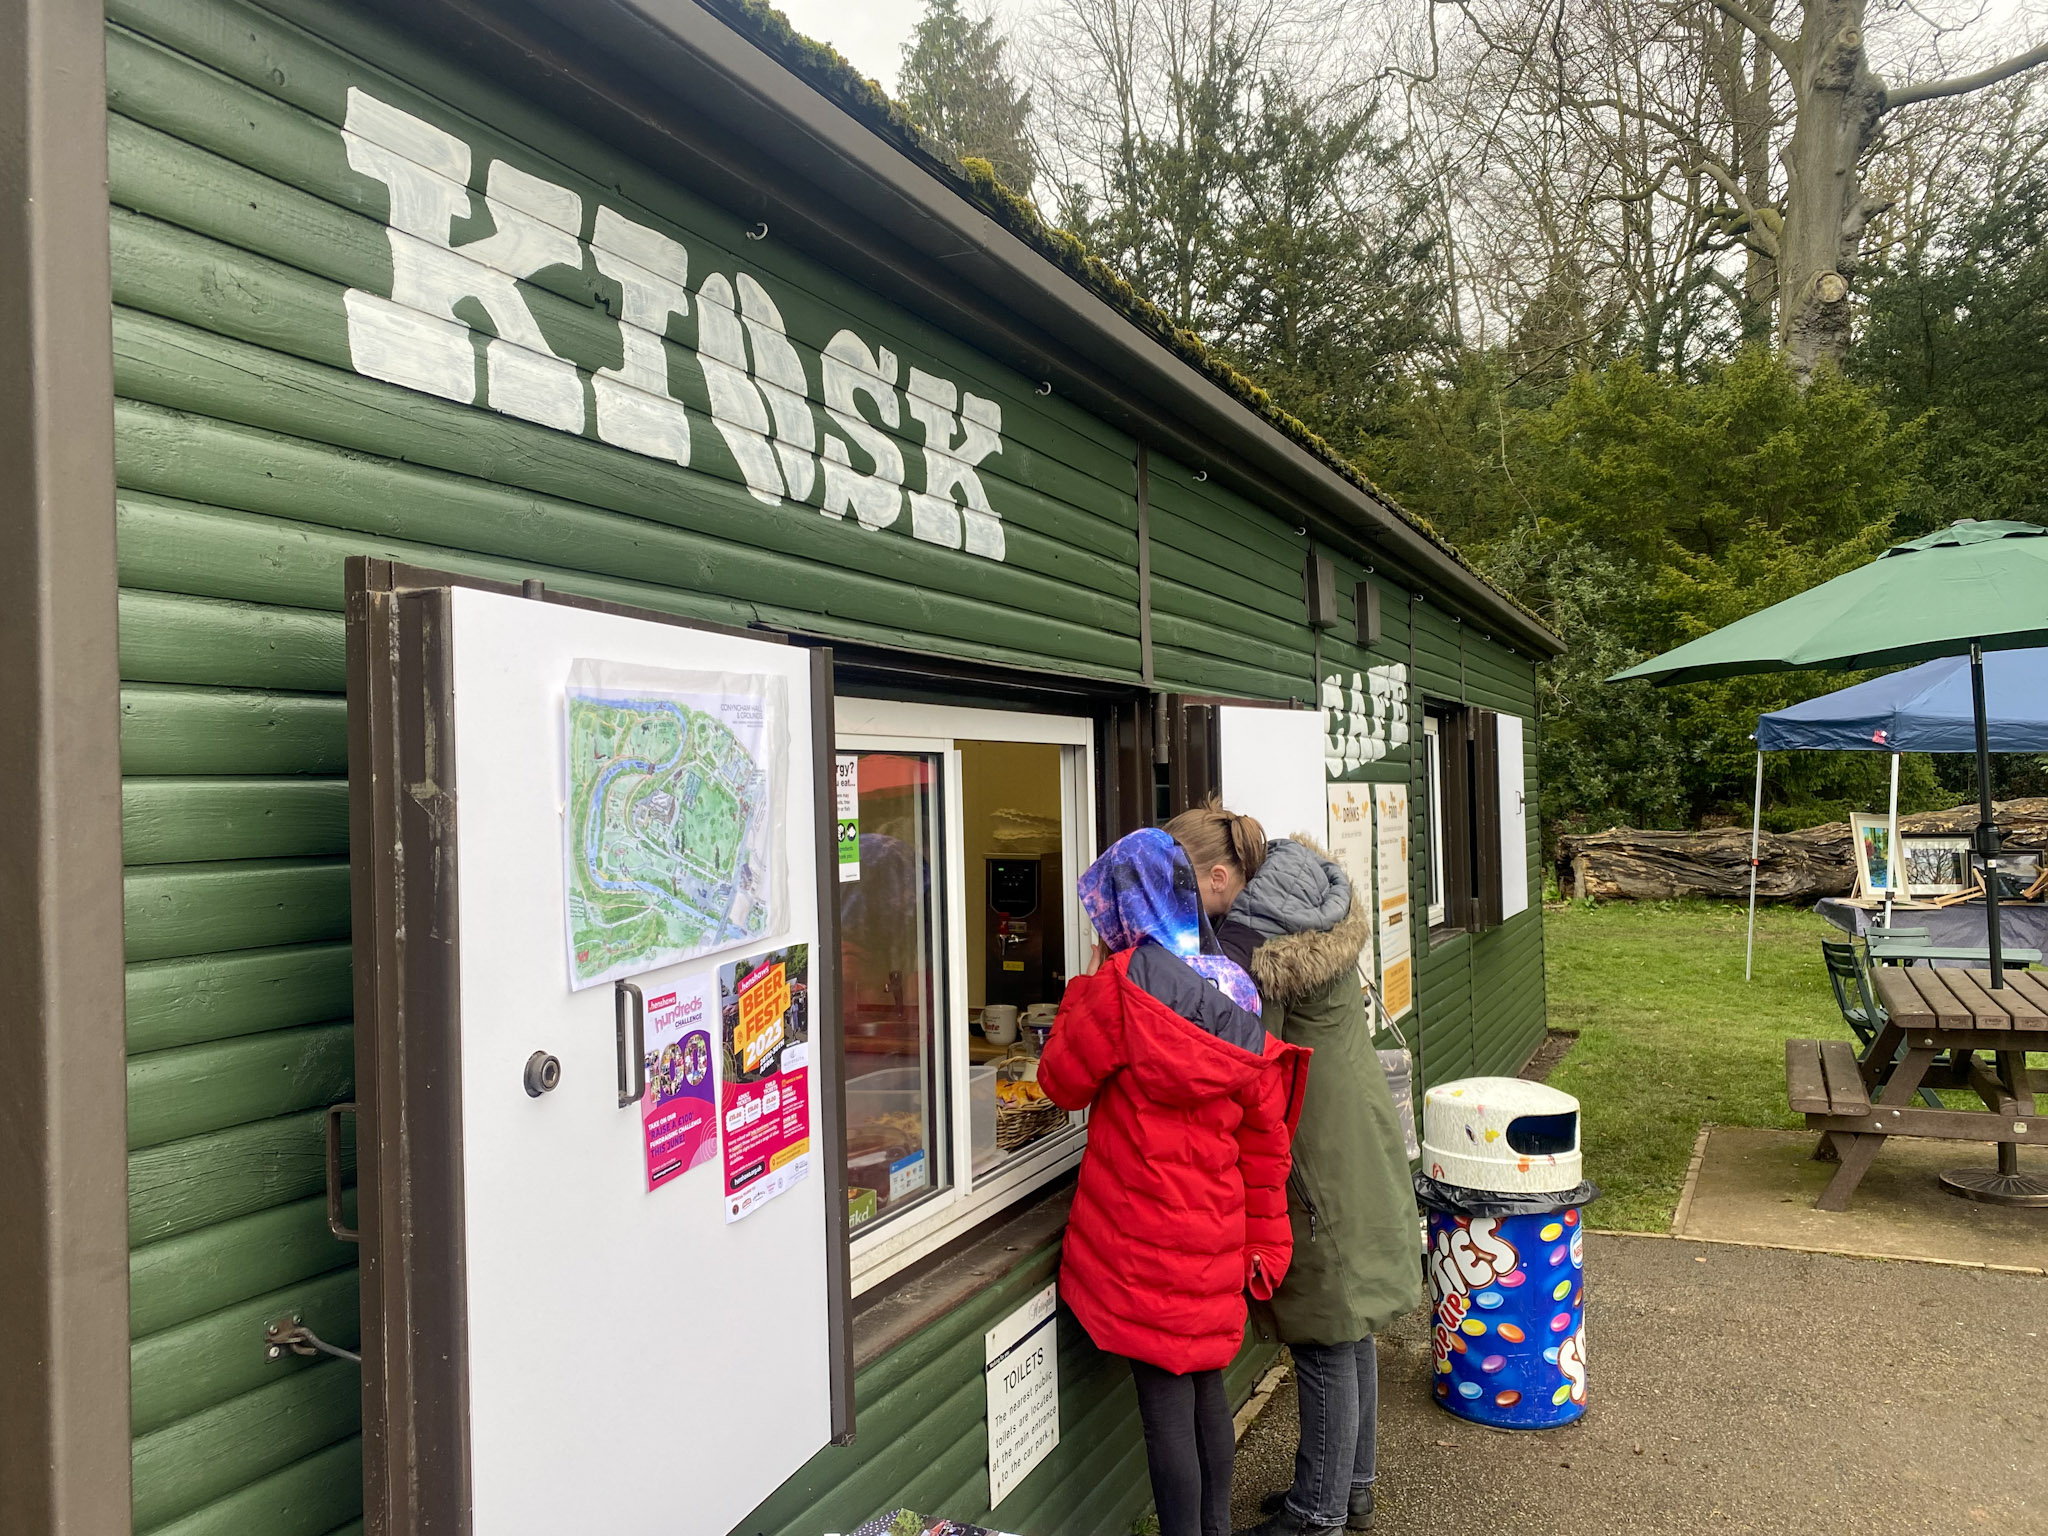 In July 2022, the Hub took on the games hut at Conyngham Hall, which is now under community management. We had a very busy summer holiday period, with pitch and putt, crazy golf and tennis proving really popular. The kiosk has refreshments available and is made possible by the support of our volunteers. We have renamed this the Kiosk @ Conyngham and plan to open it during school holidays (weather permitting), so if you have some time to volunteer, please get in touch!